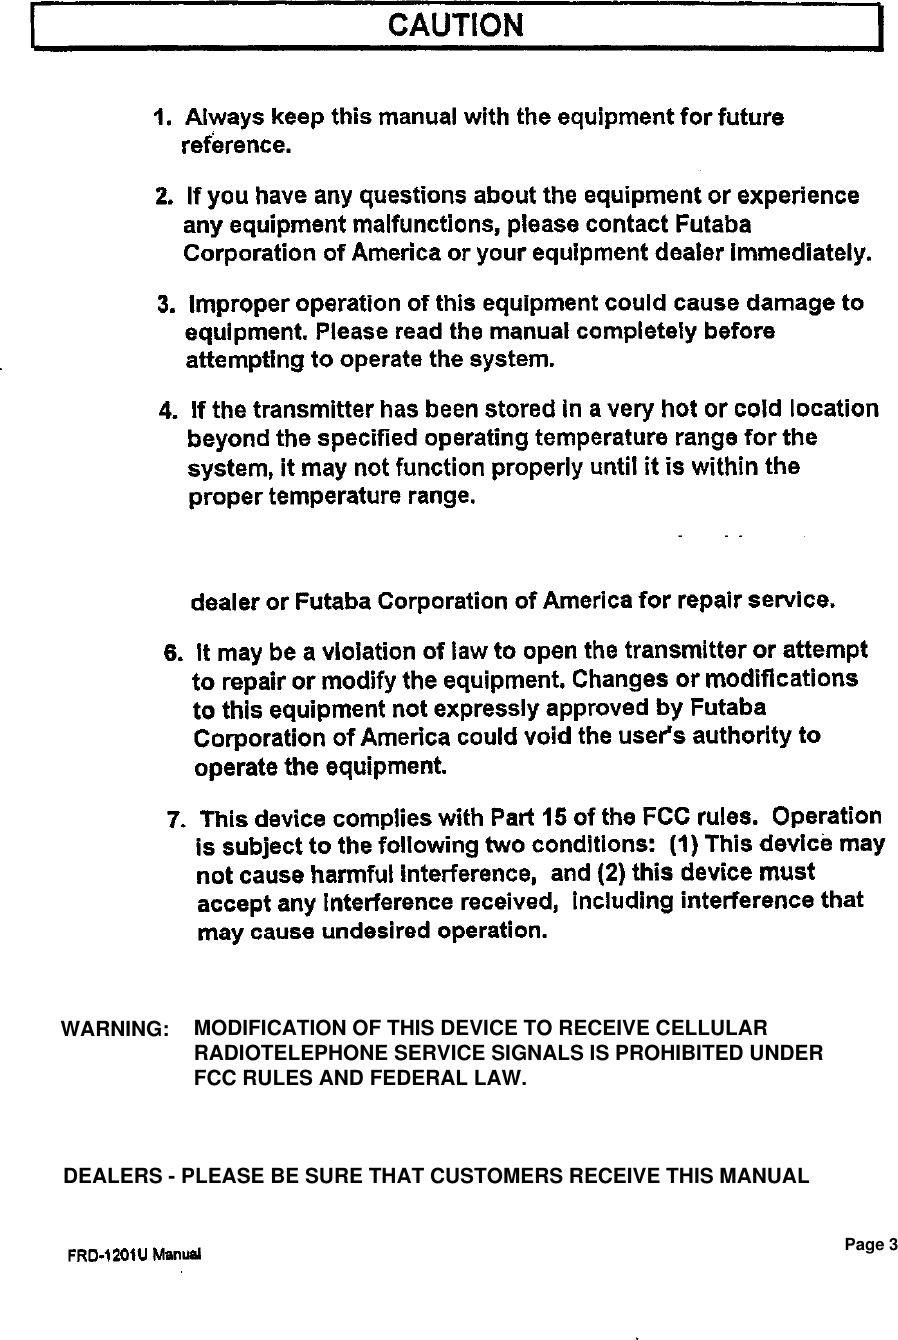 WARNING:MODIFICATION OF THIS DEVICE TO RECEIVE CELLULARRADIOTELEPHONE SERVICE SIGNALS IS PROHIBITED UNDERFCC RULES AND FEDERAL LAW.DEALERS - PLEASE BE SURE THAT CUSTOMERS RECEIVE THIS MANUALPage 3